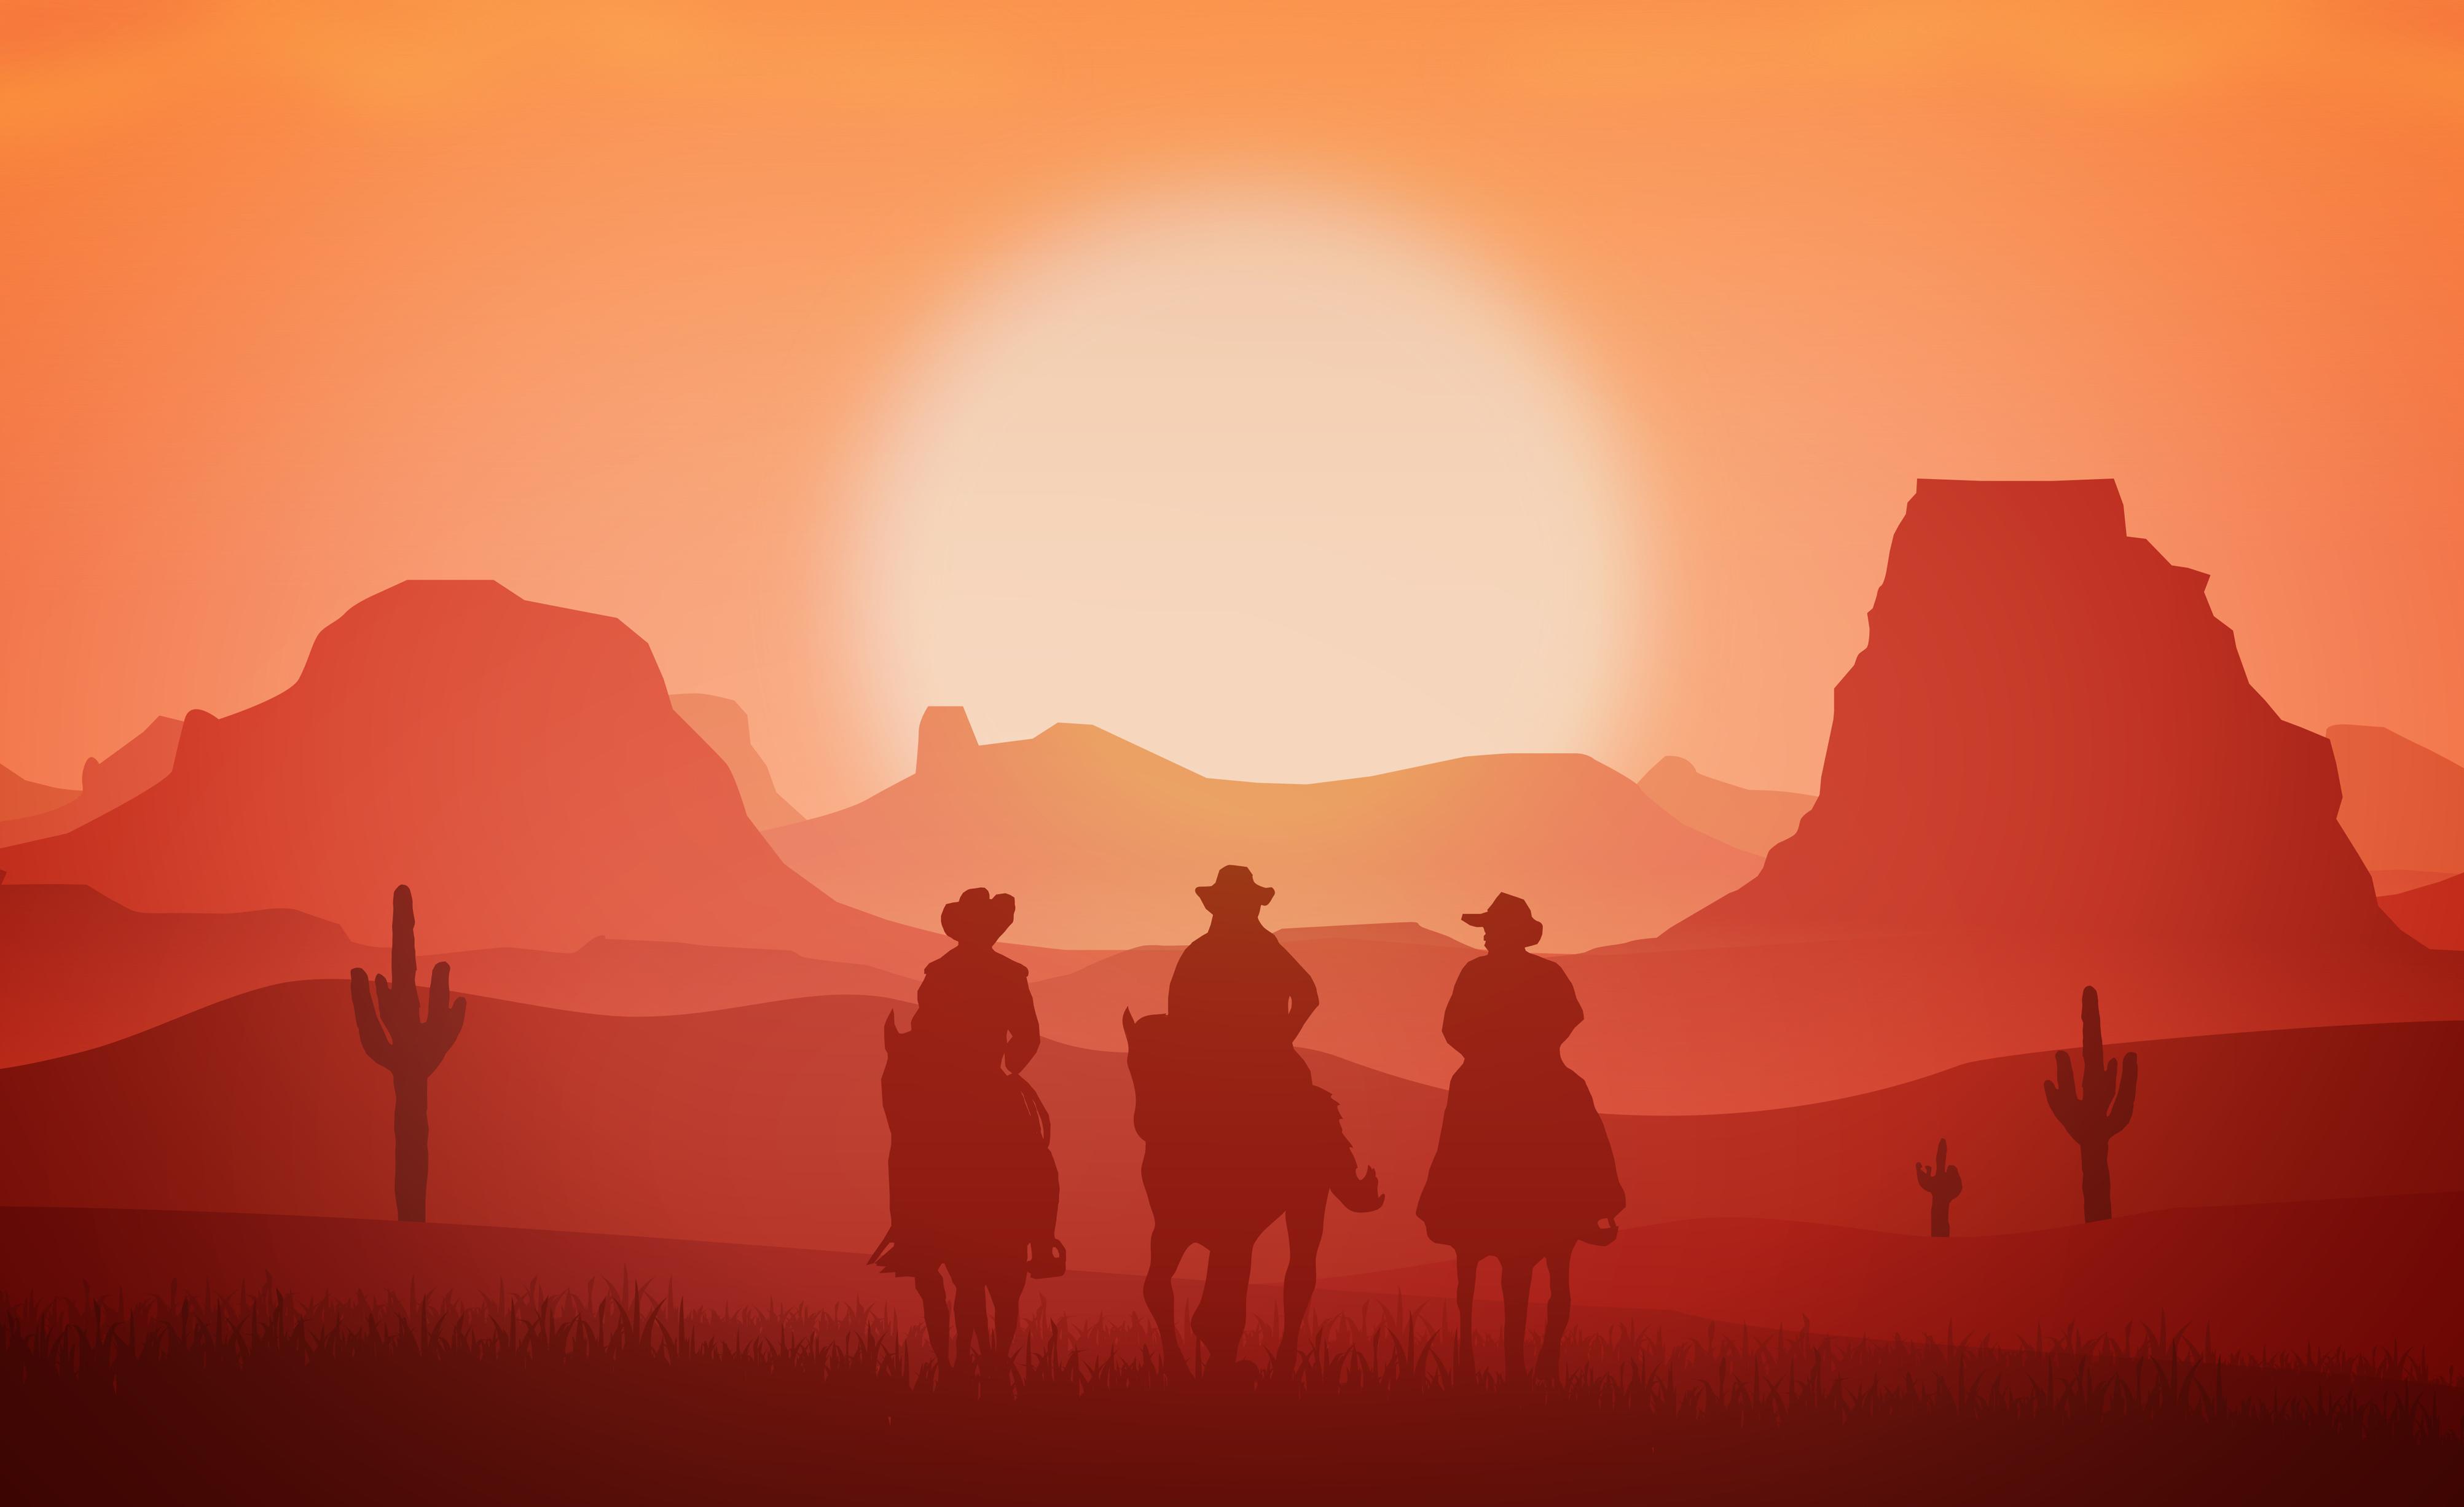 Found this minimal wallpaper while searching for RDR2